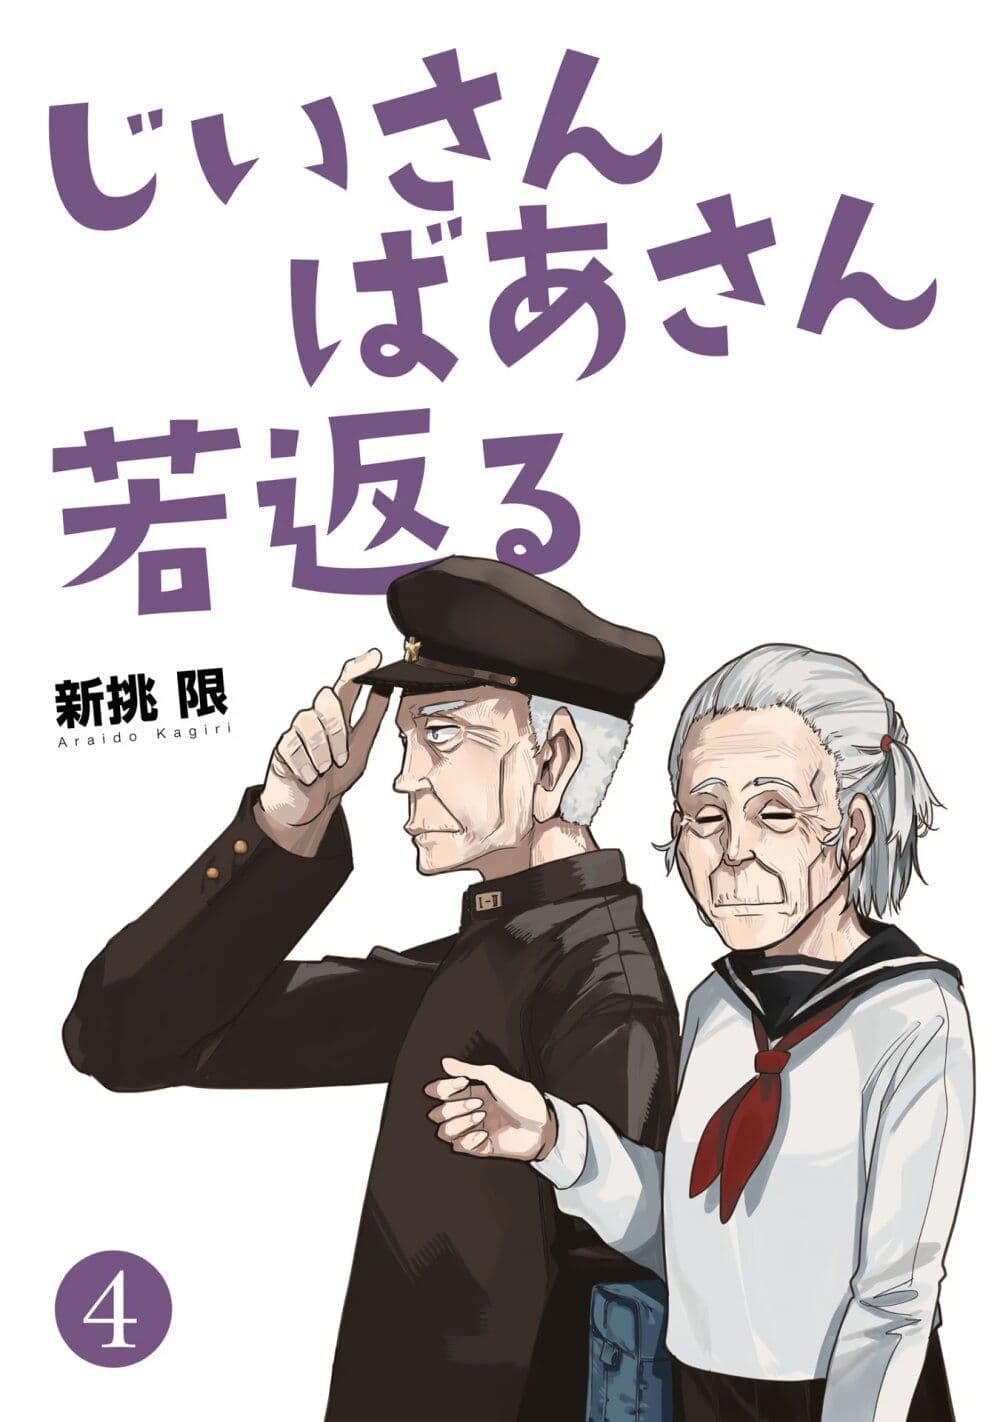 A Story About A Grampa and Granma Returned Back to their Youth คู่รักวัยดึกหวนคืนวัยหวาน 73-73